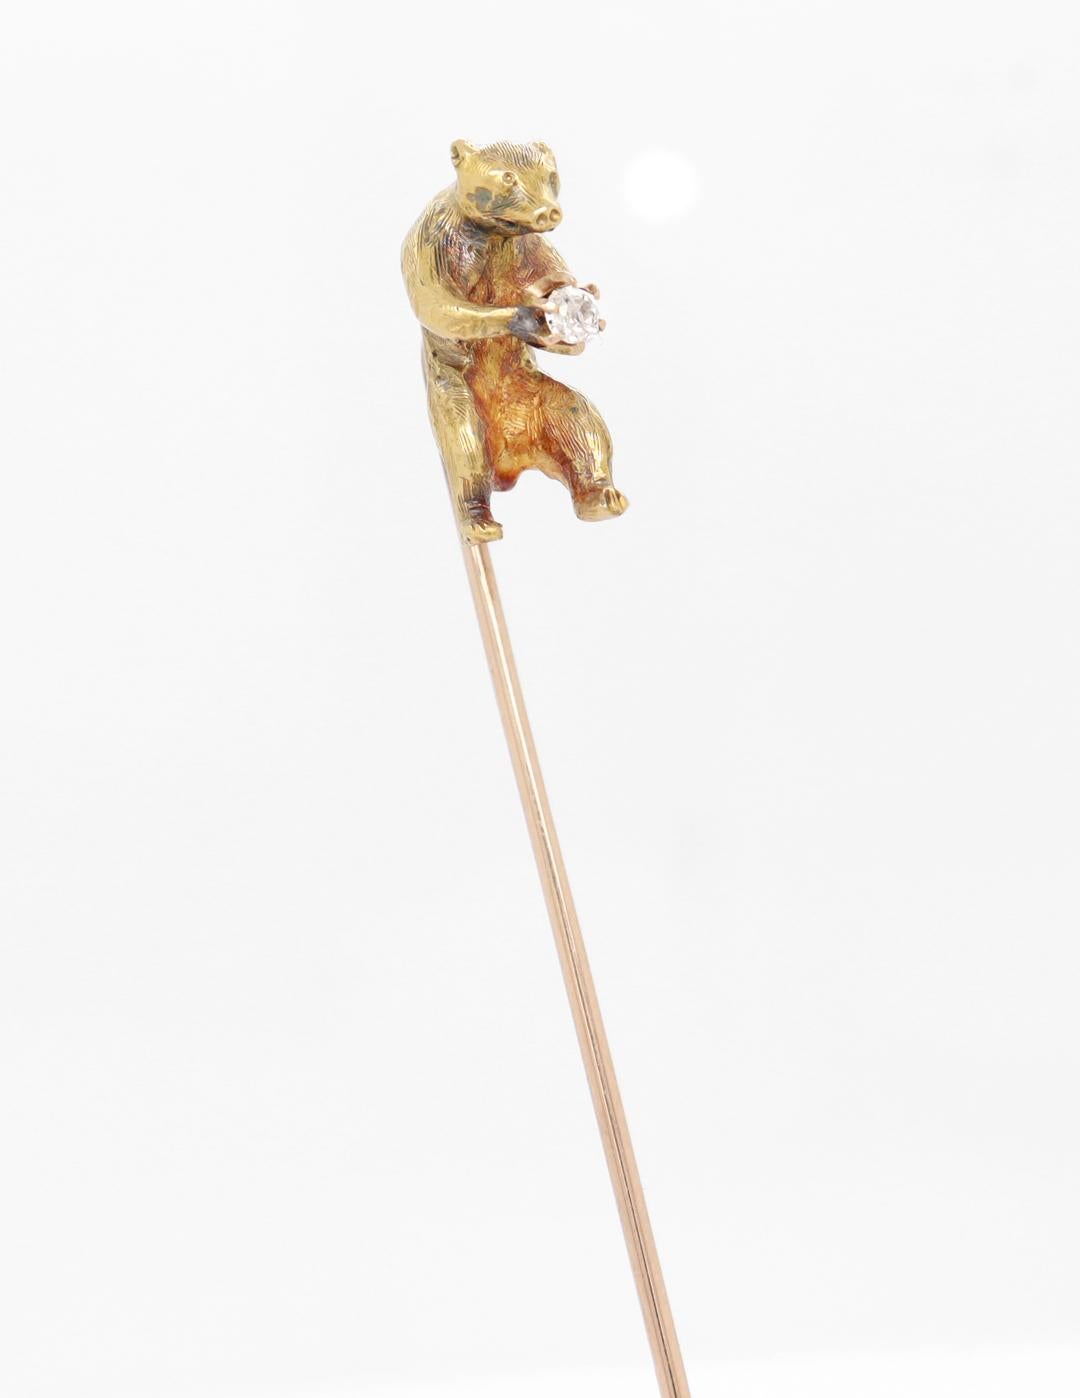 A fine antique stickpin.

In yellow gold with a white, round-cut diamond.

In the form of a walking bear in full stride.

The 18k bear top is mounted on a 10k gold pin.

Simply a wonderful Ursine stick pin!

Date:
20th Century

Overall Condition:
It